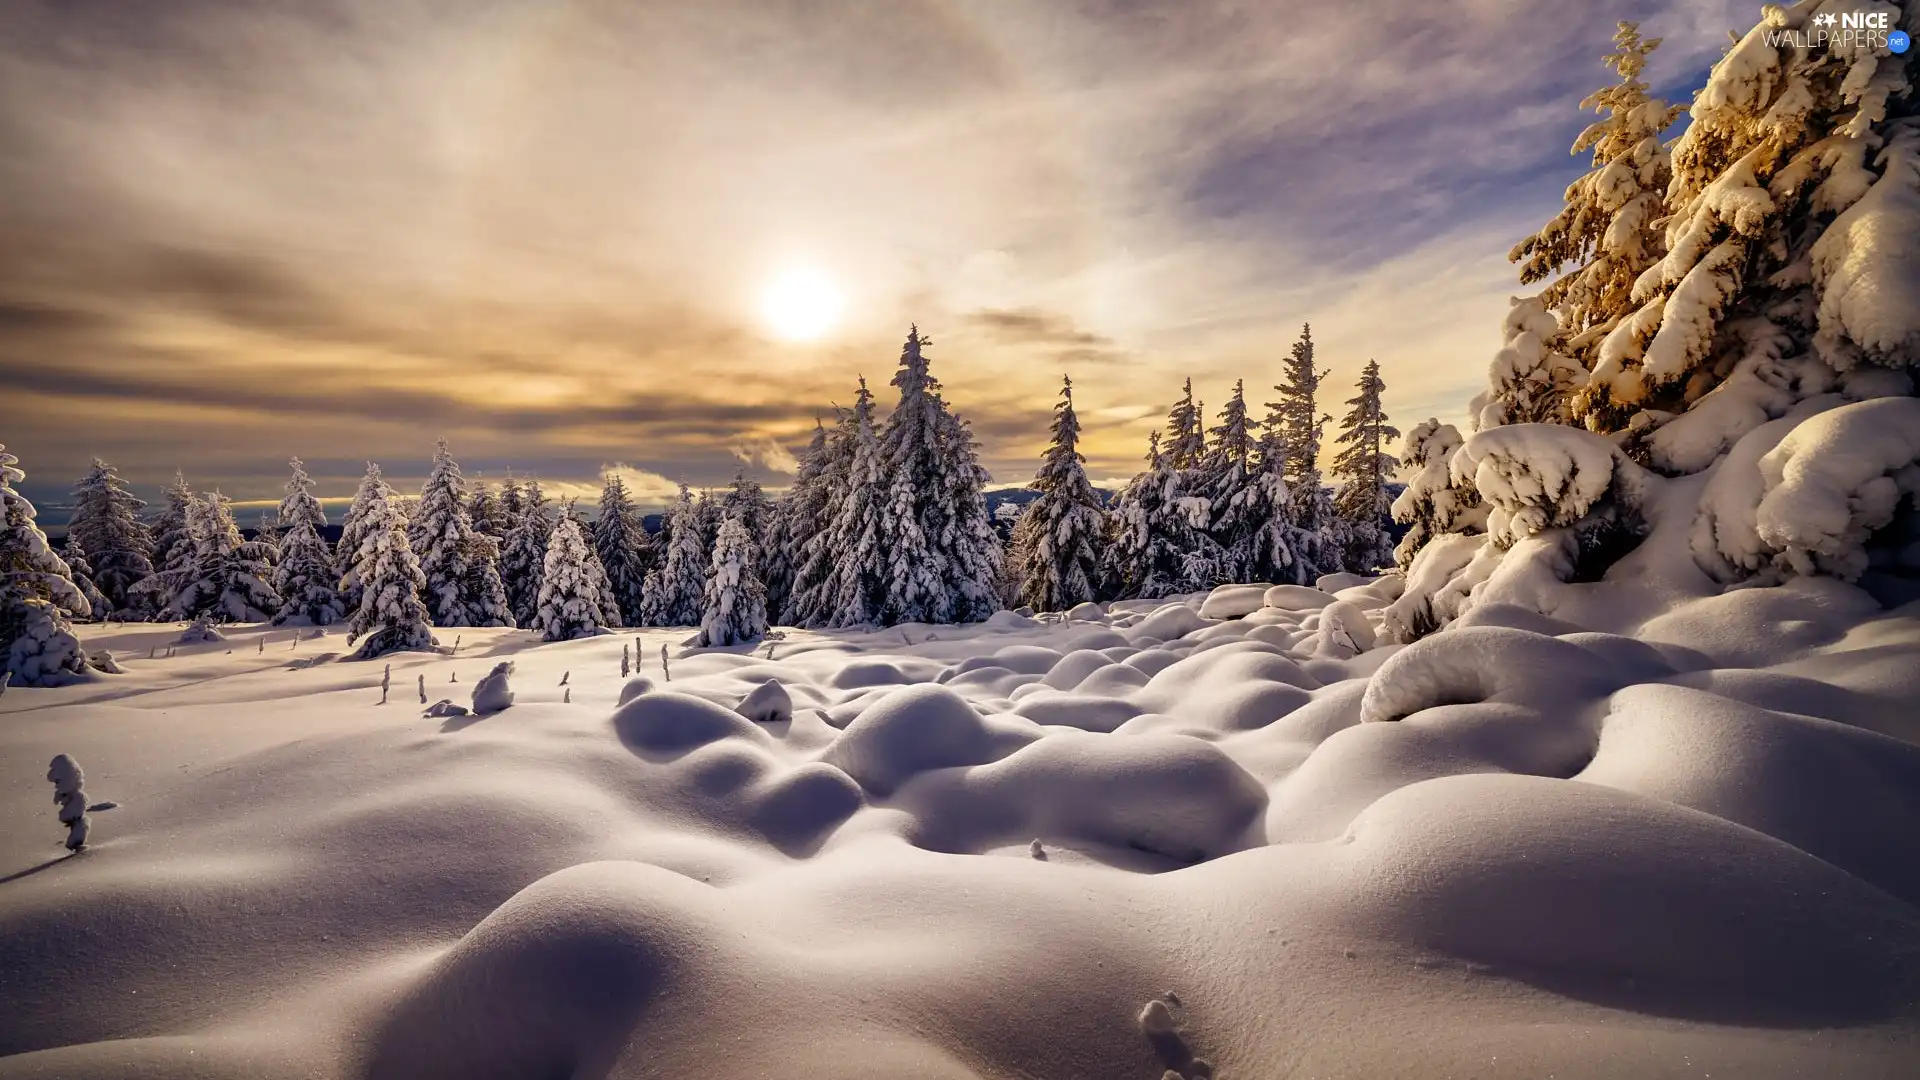 trees, winter, Sunrise, drifts, viewes, Snowy